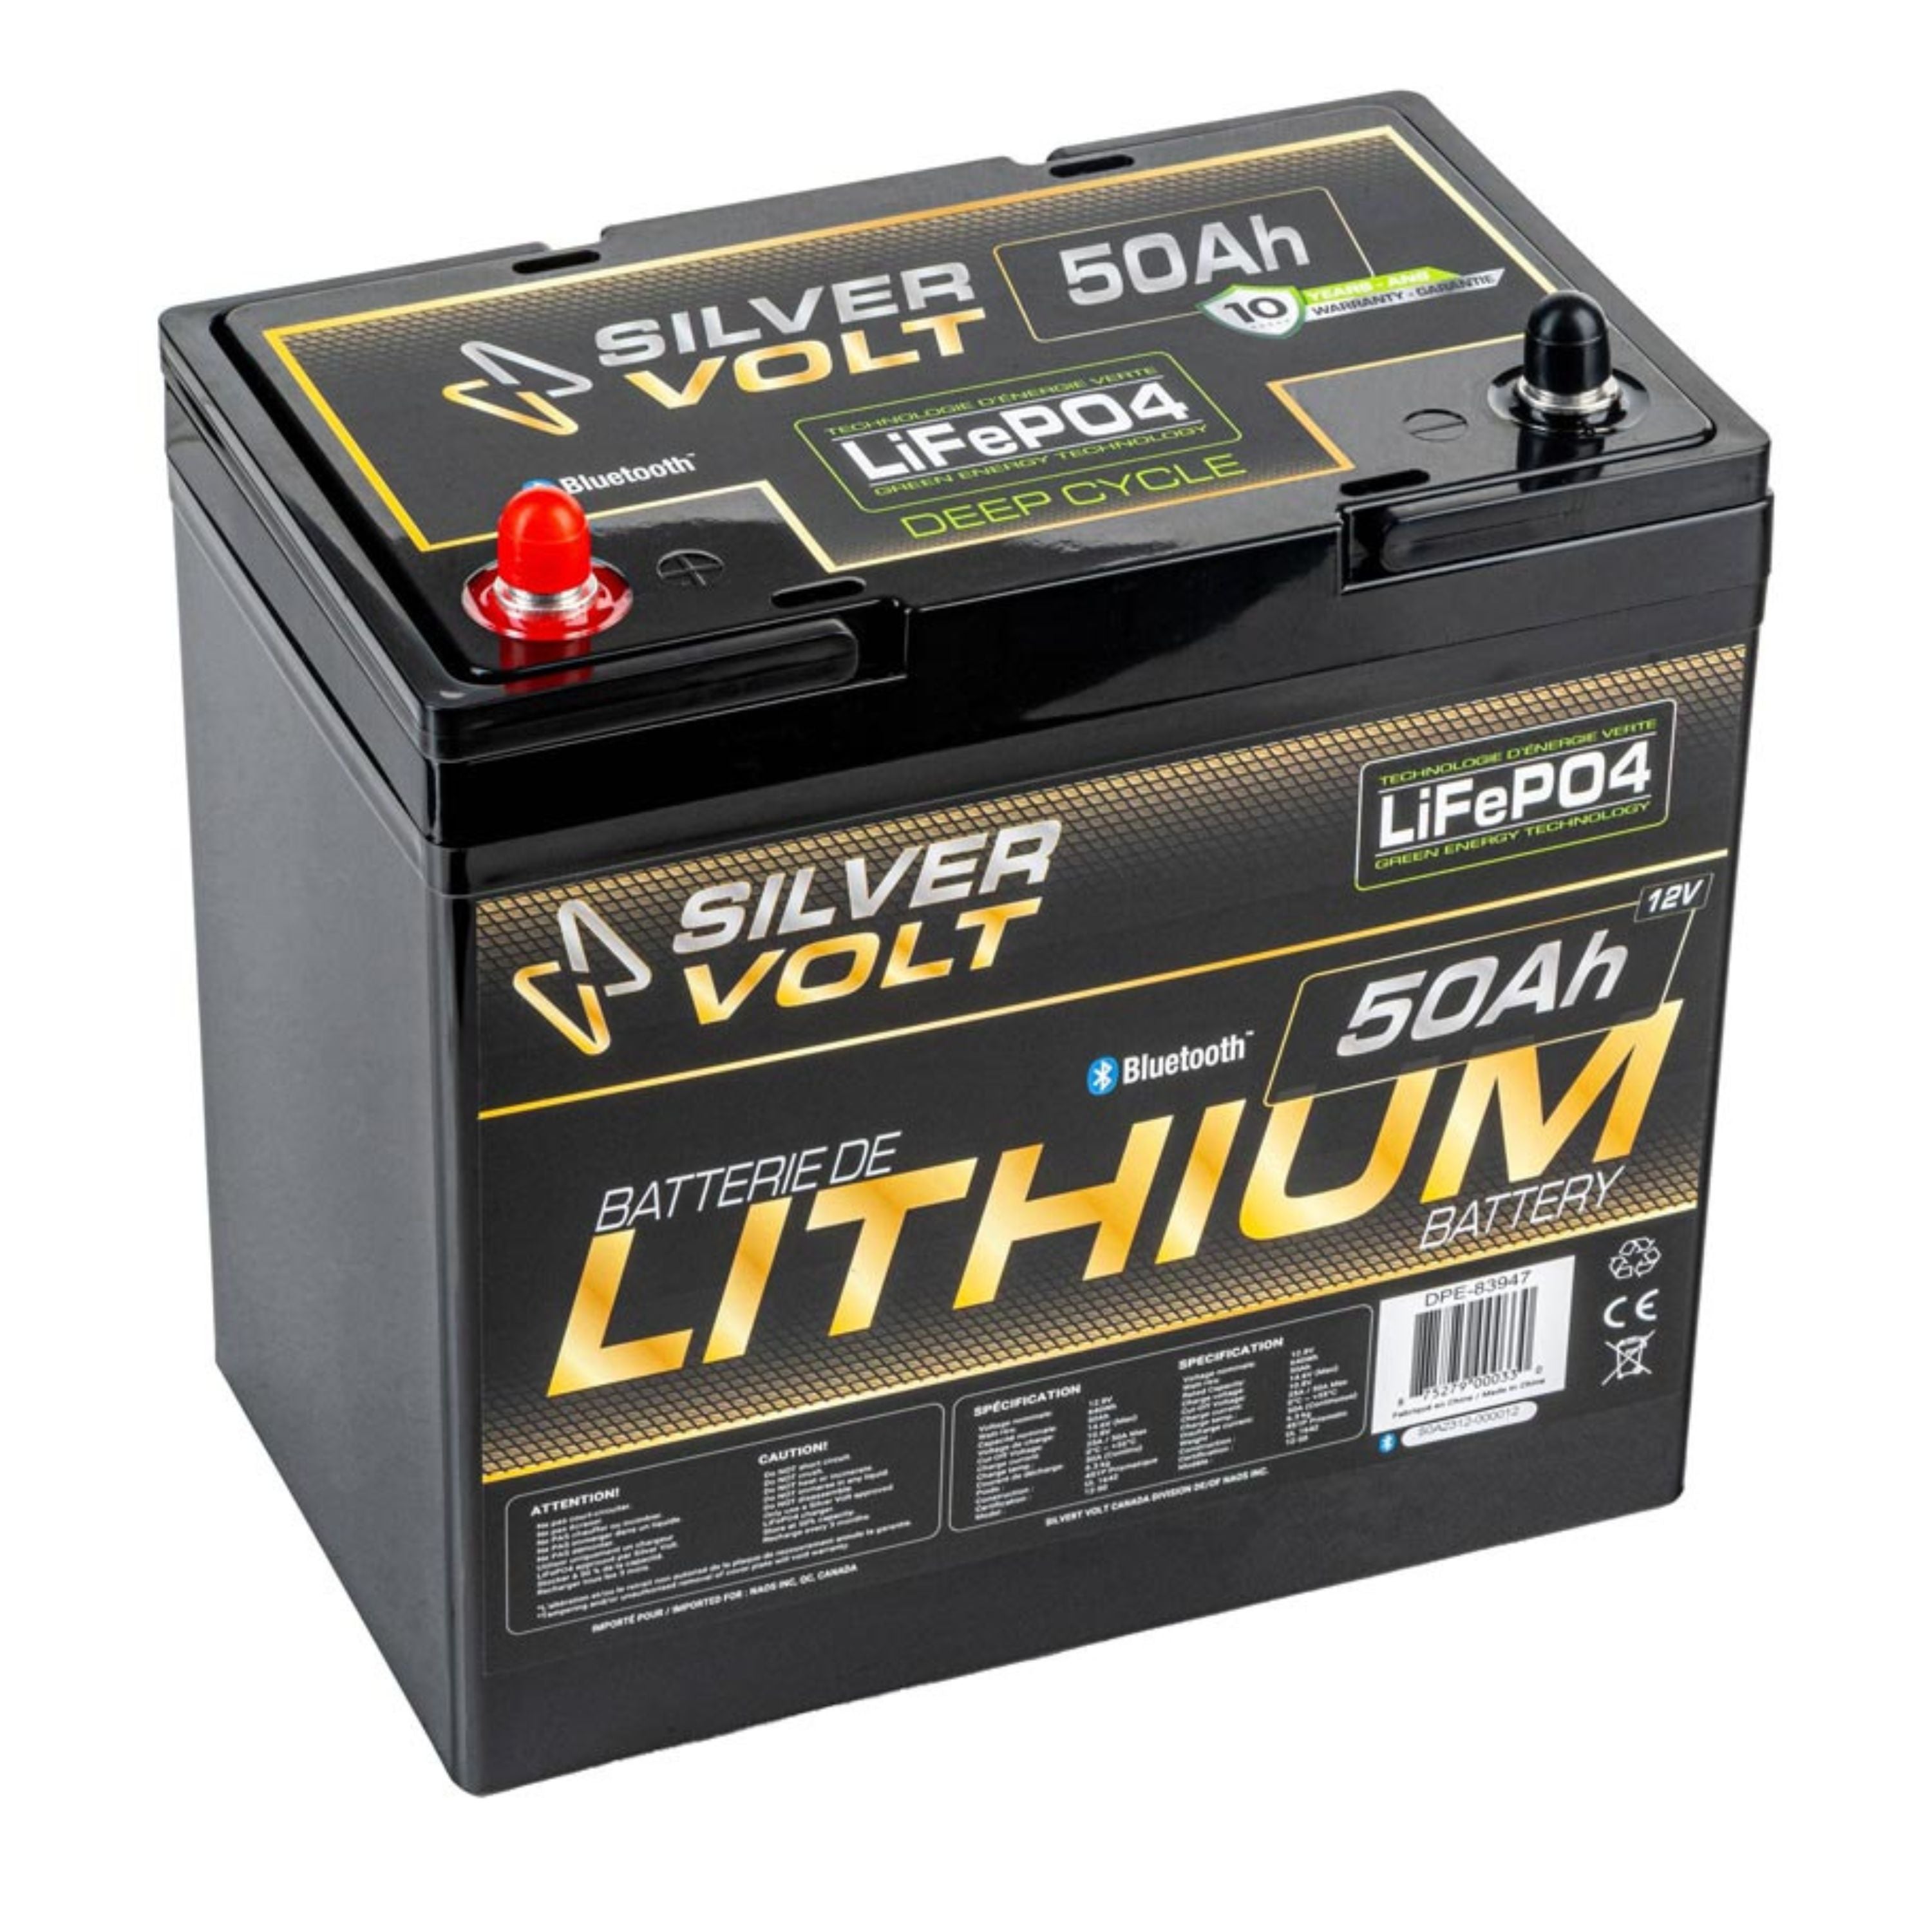 "LiFePO4" Rechargeable Lithium battery - 50 A